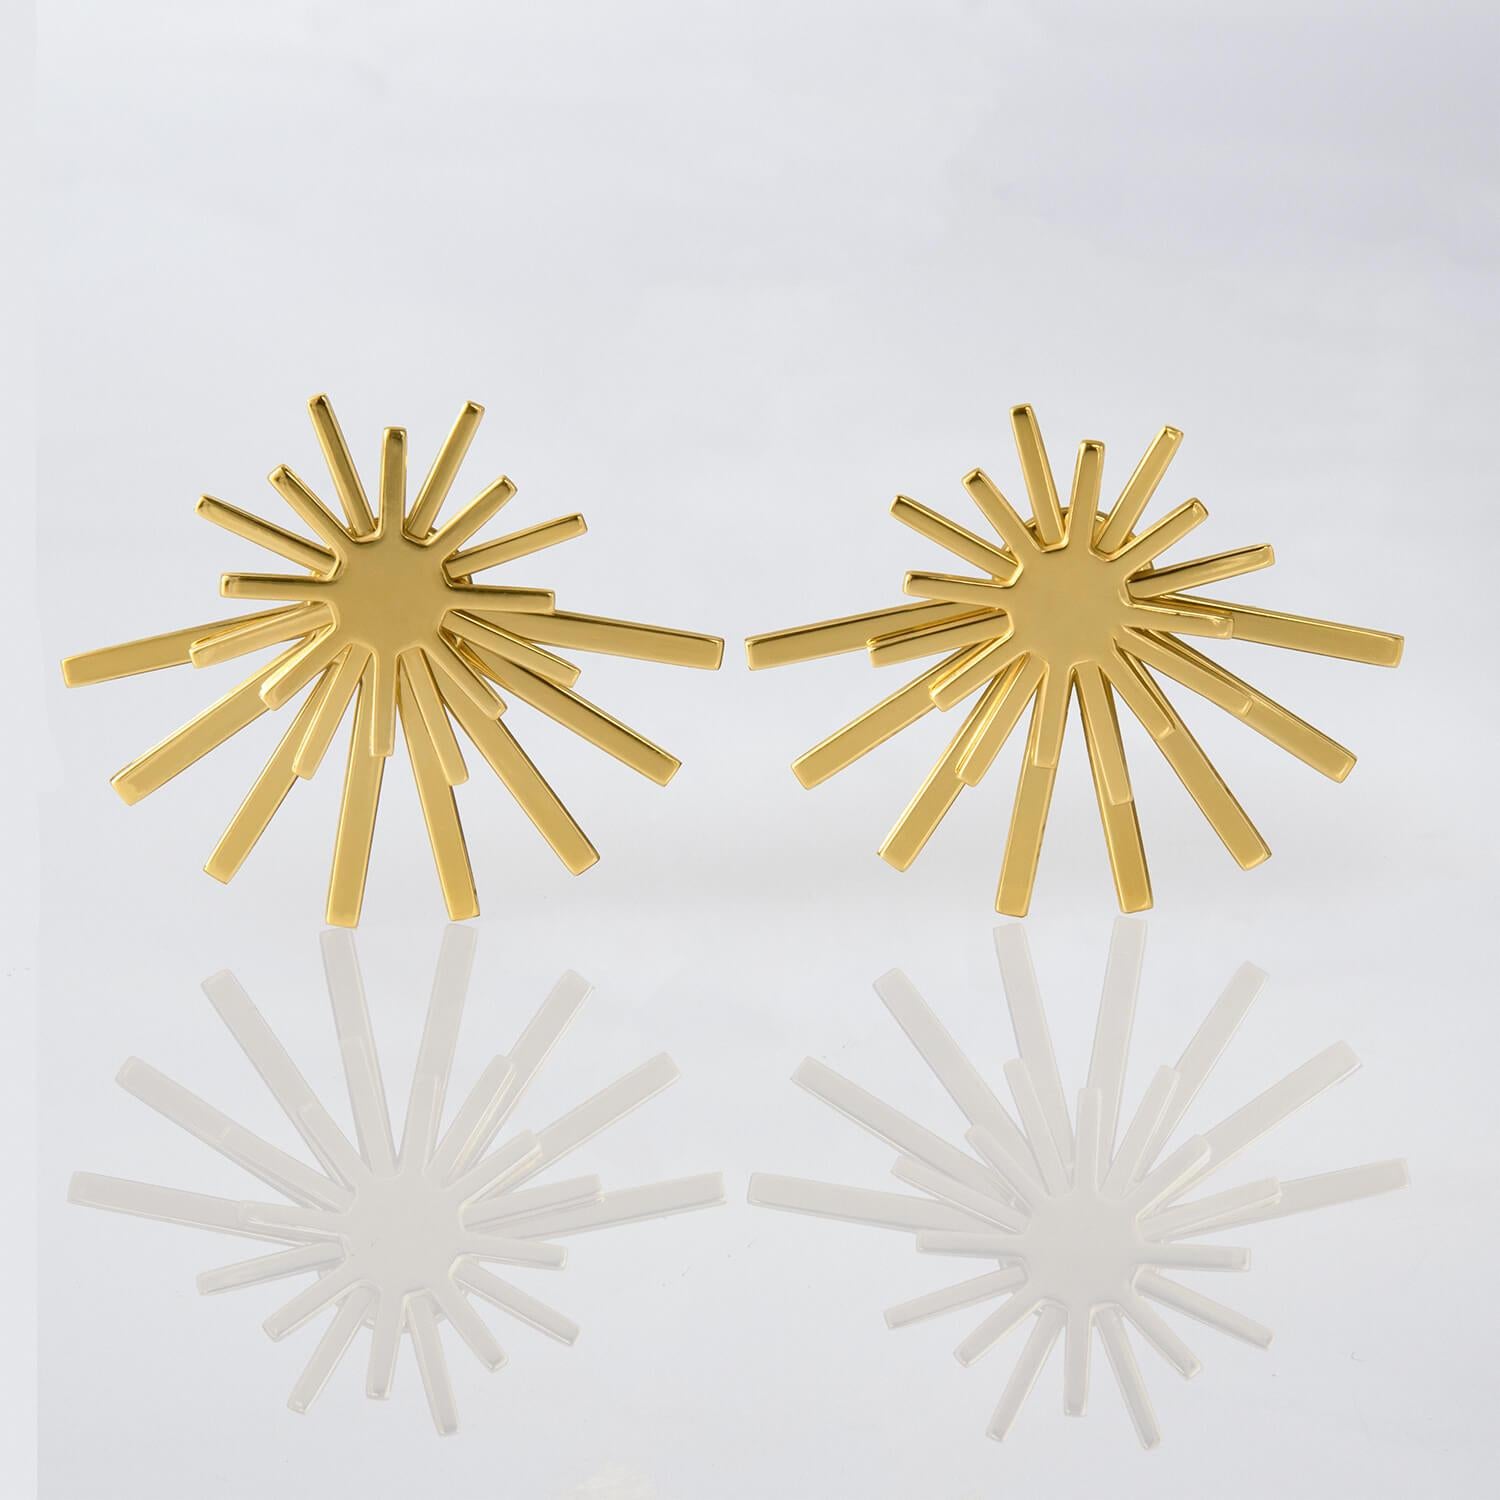 Introducing THE STARR COLLECTION, our first ever sold product. The idea of this collection is creating an exciting 3D earring formed by the overlapping parts that sit on either side of your ear.
Designing this earring was Geertje’s graduation